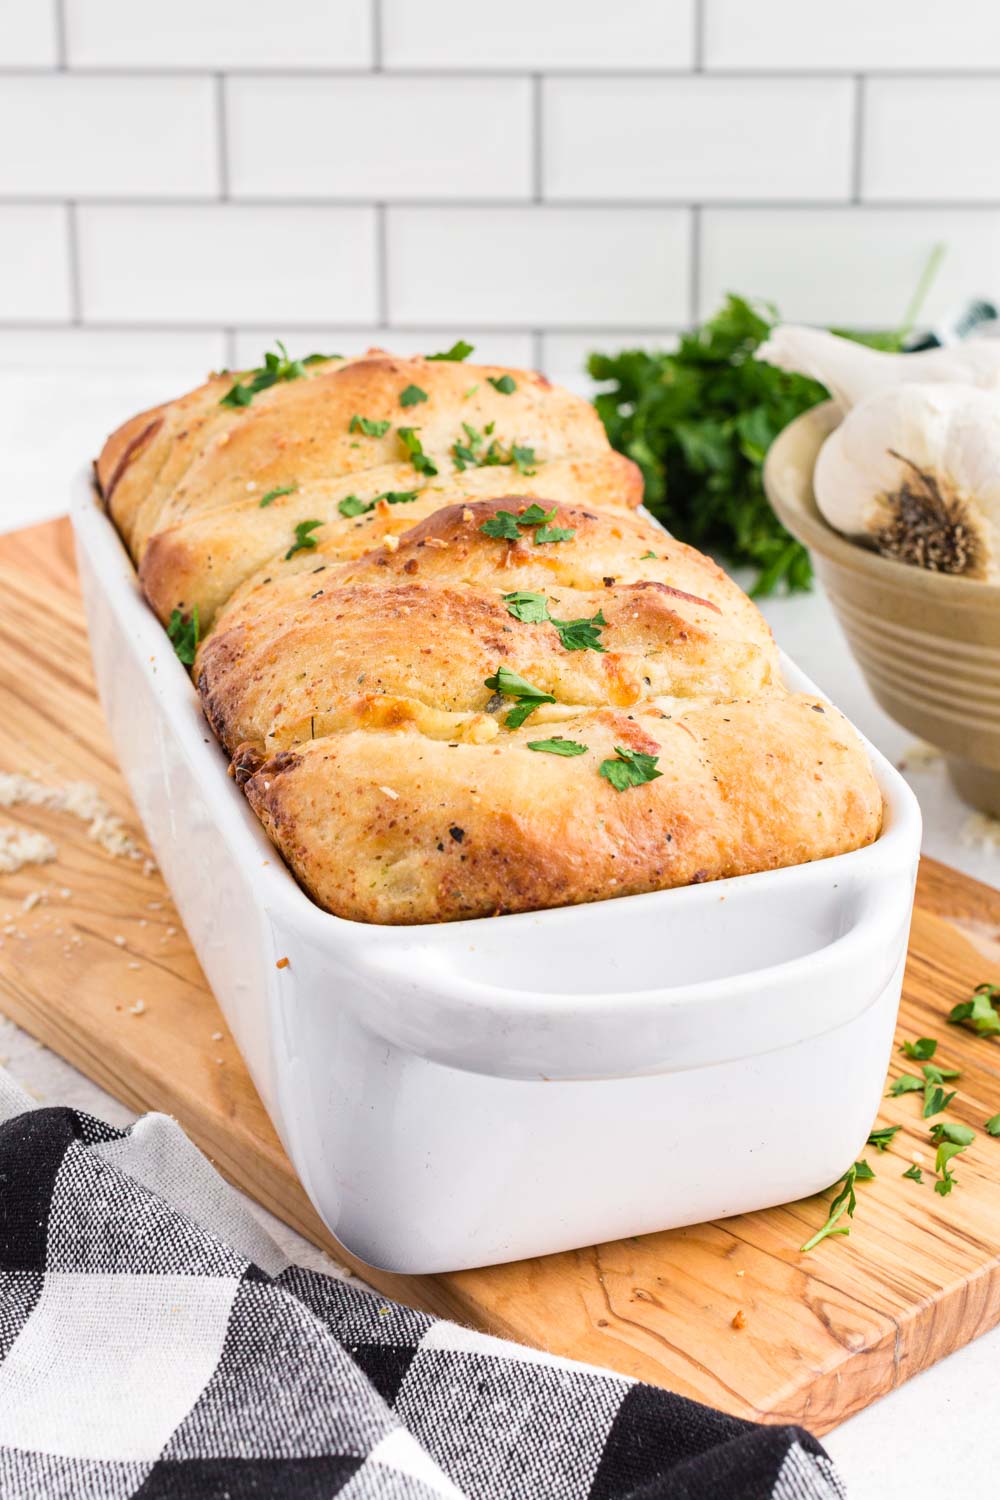 Pull Apart Garlic Bread in a bread loaf baking dish on wooden kitchen board, bowl of whole garlic, fresh parsley, black and white checkered linen, white stacked tiles in the background. 